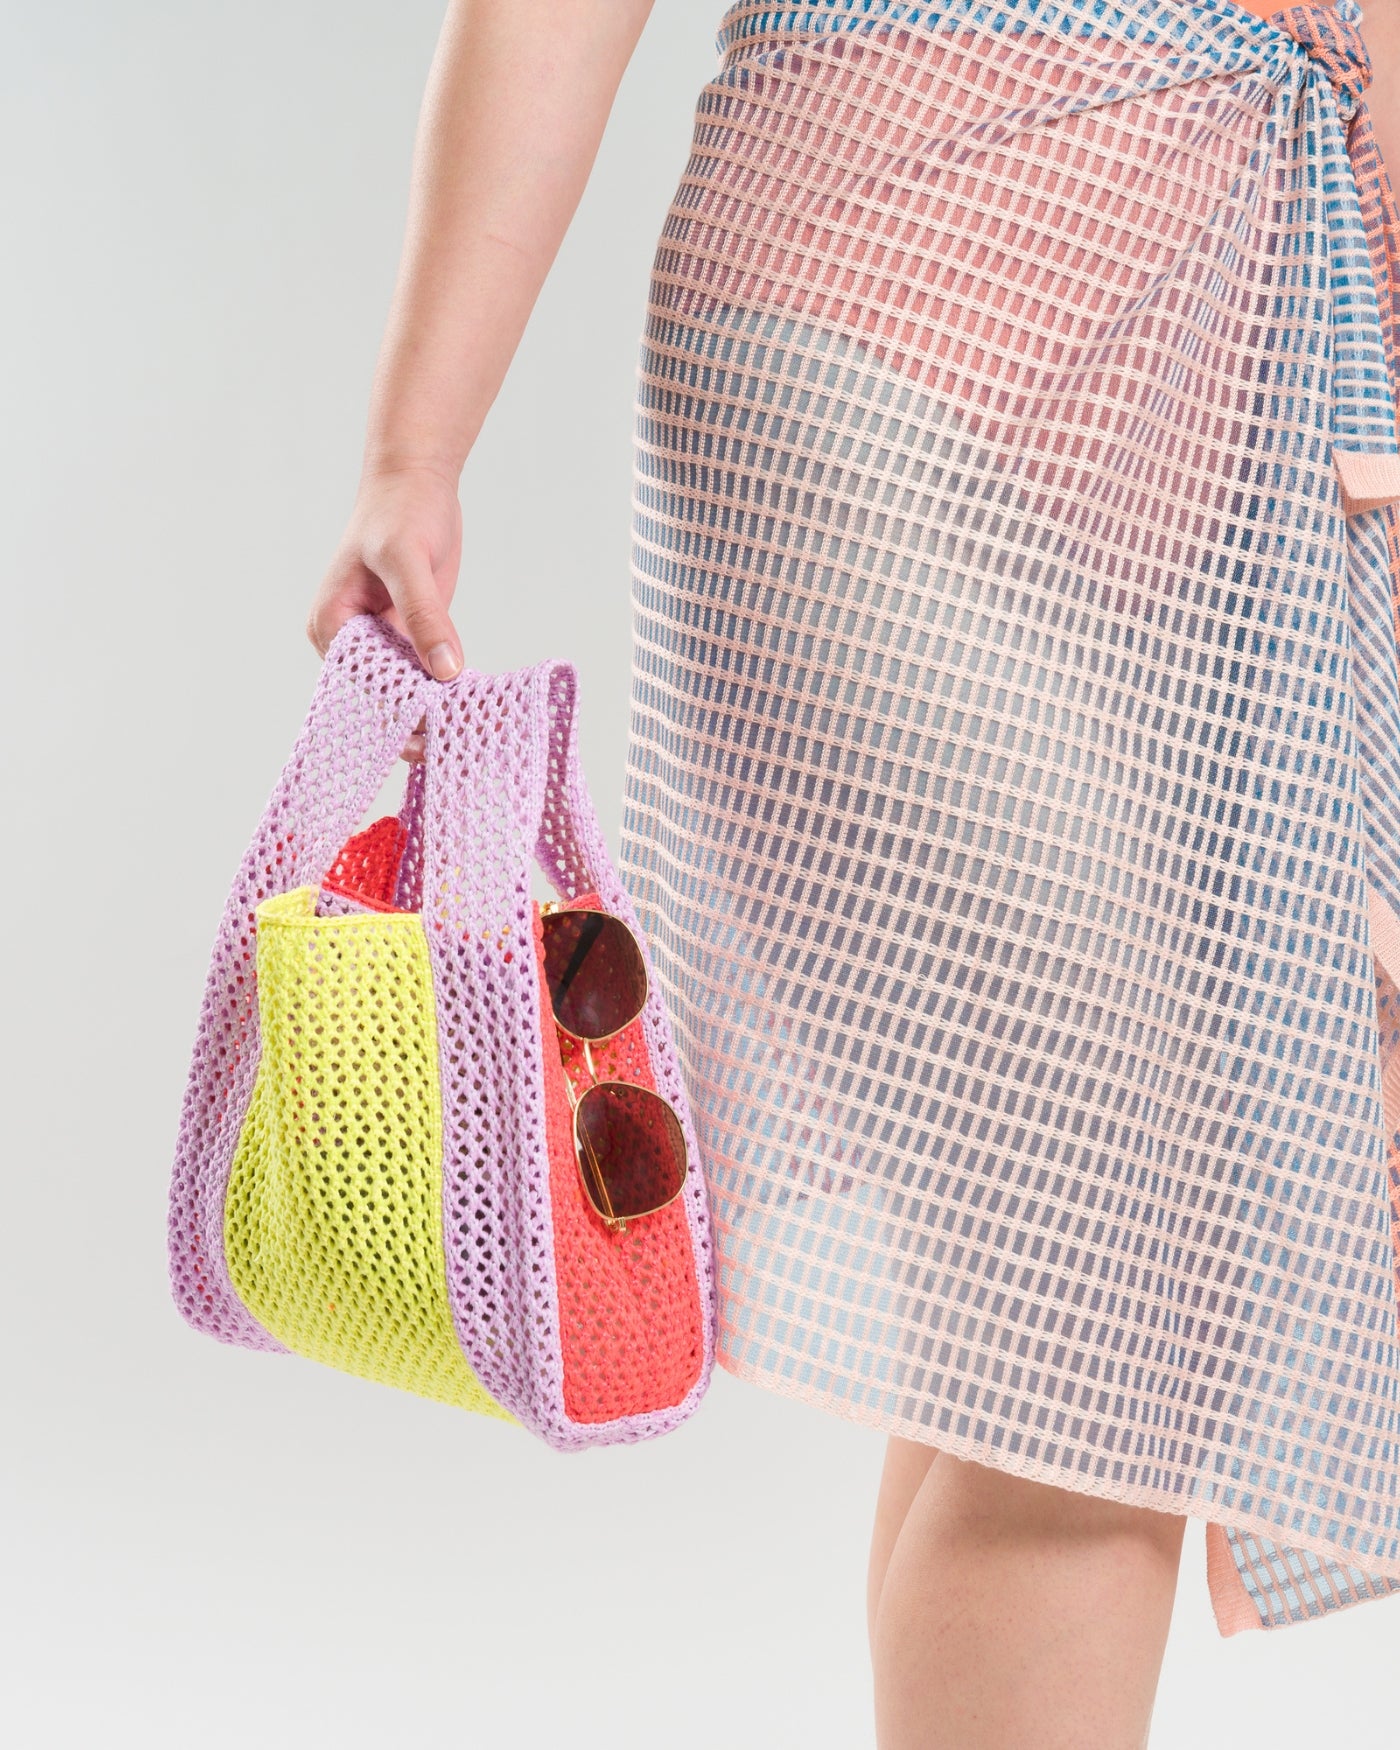 Colorblocked raffia crochet beach bag with sunglasses and open knit sarong